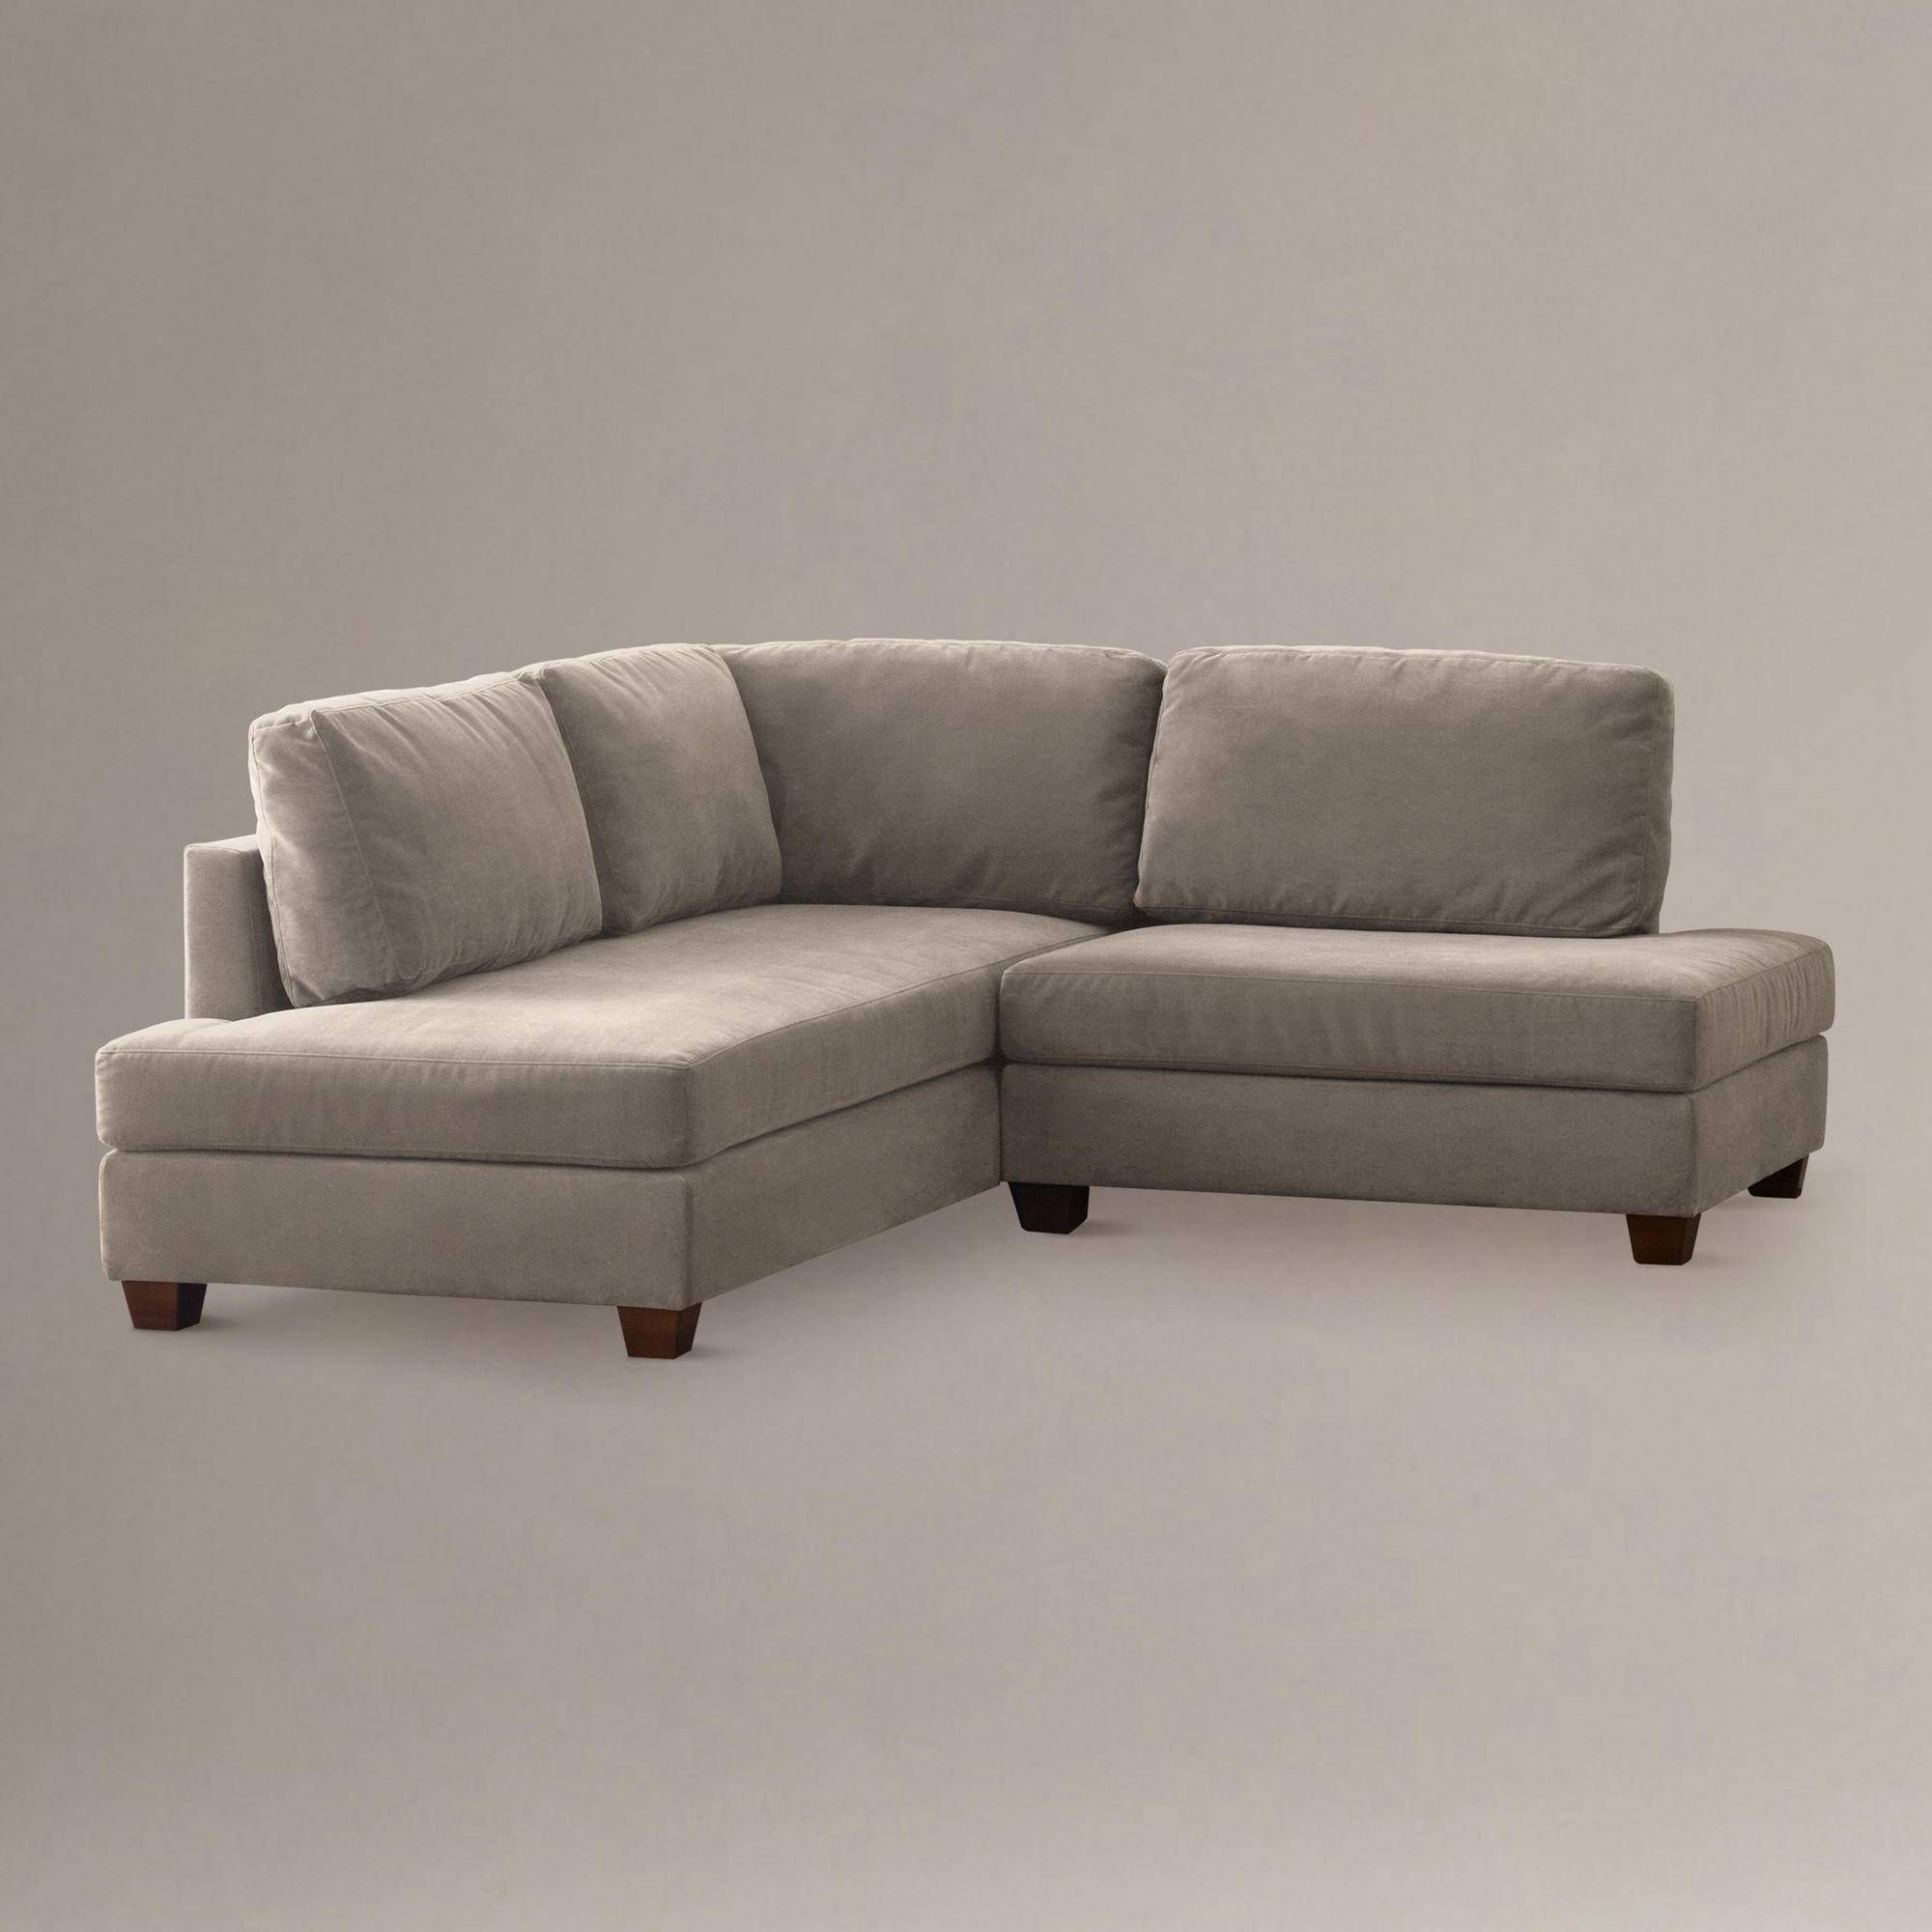 Wyatt Sectional Sofa 26 With Wyatt Sectional Sofa | Jinanhongyu Pertaining To Wyatt Sectional Sofas (View 5 of 15)